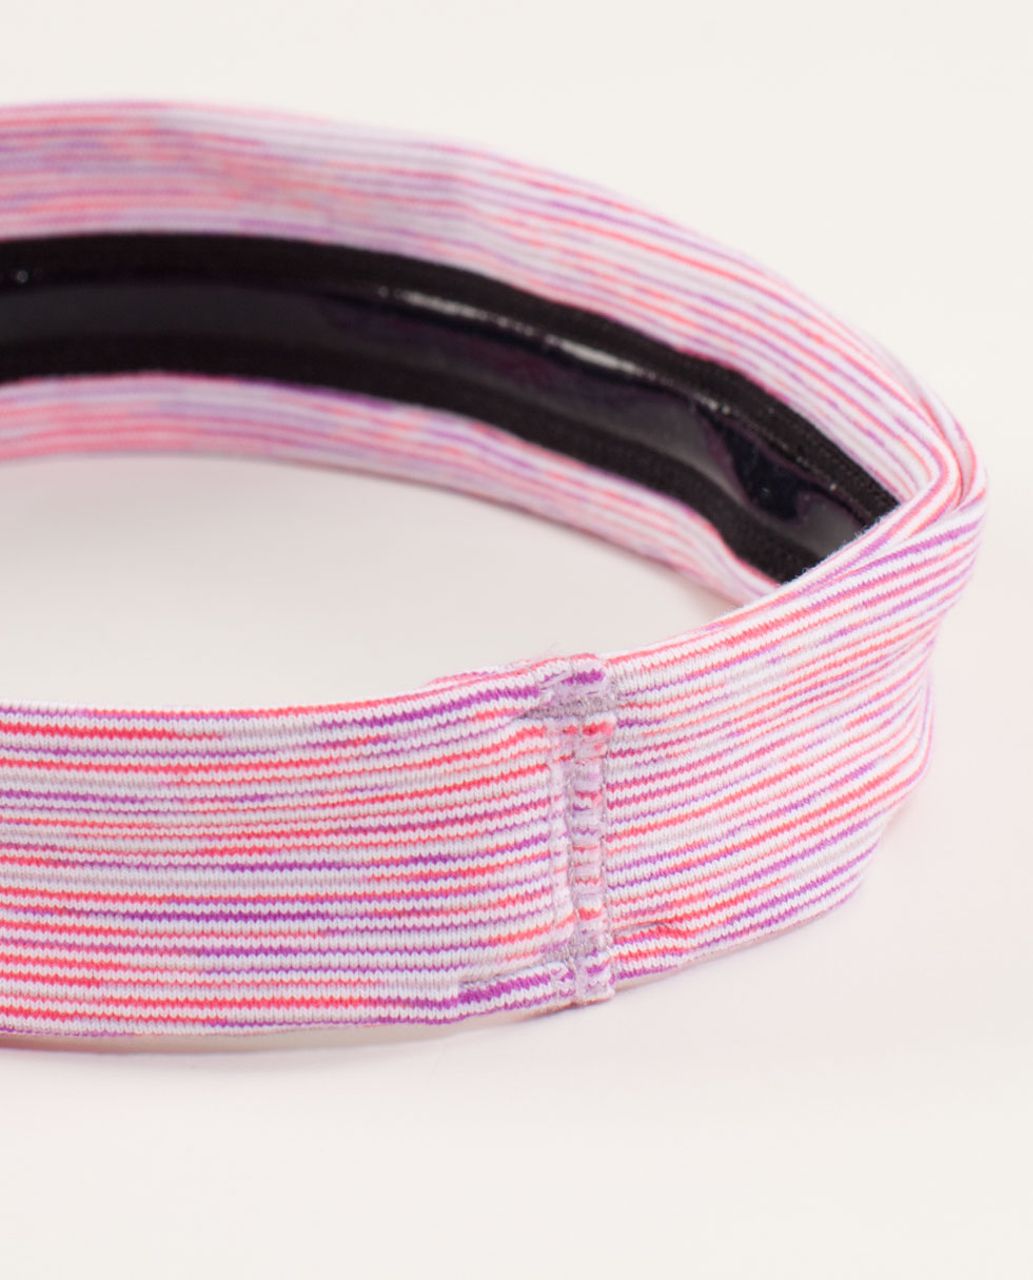 Lululemon Slipless Headband - Wee Are From Space White April Multi